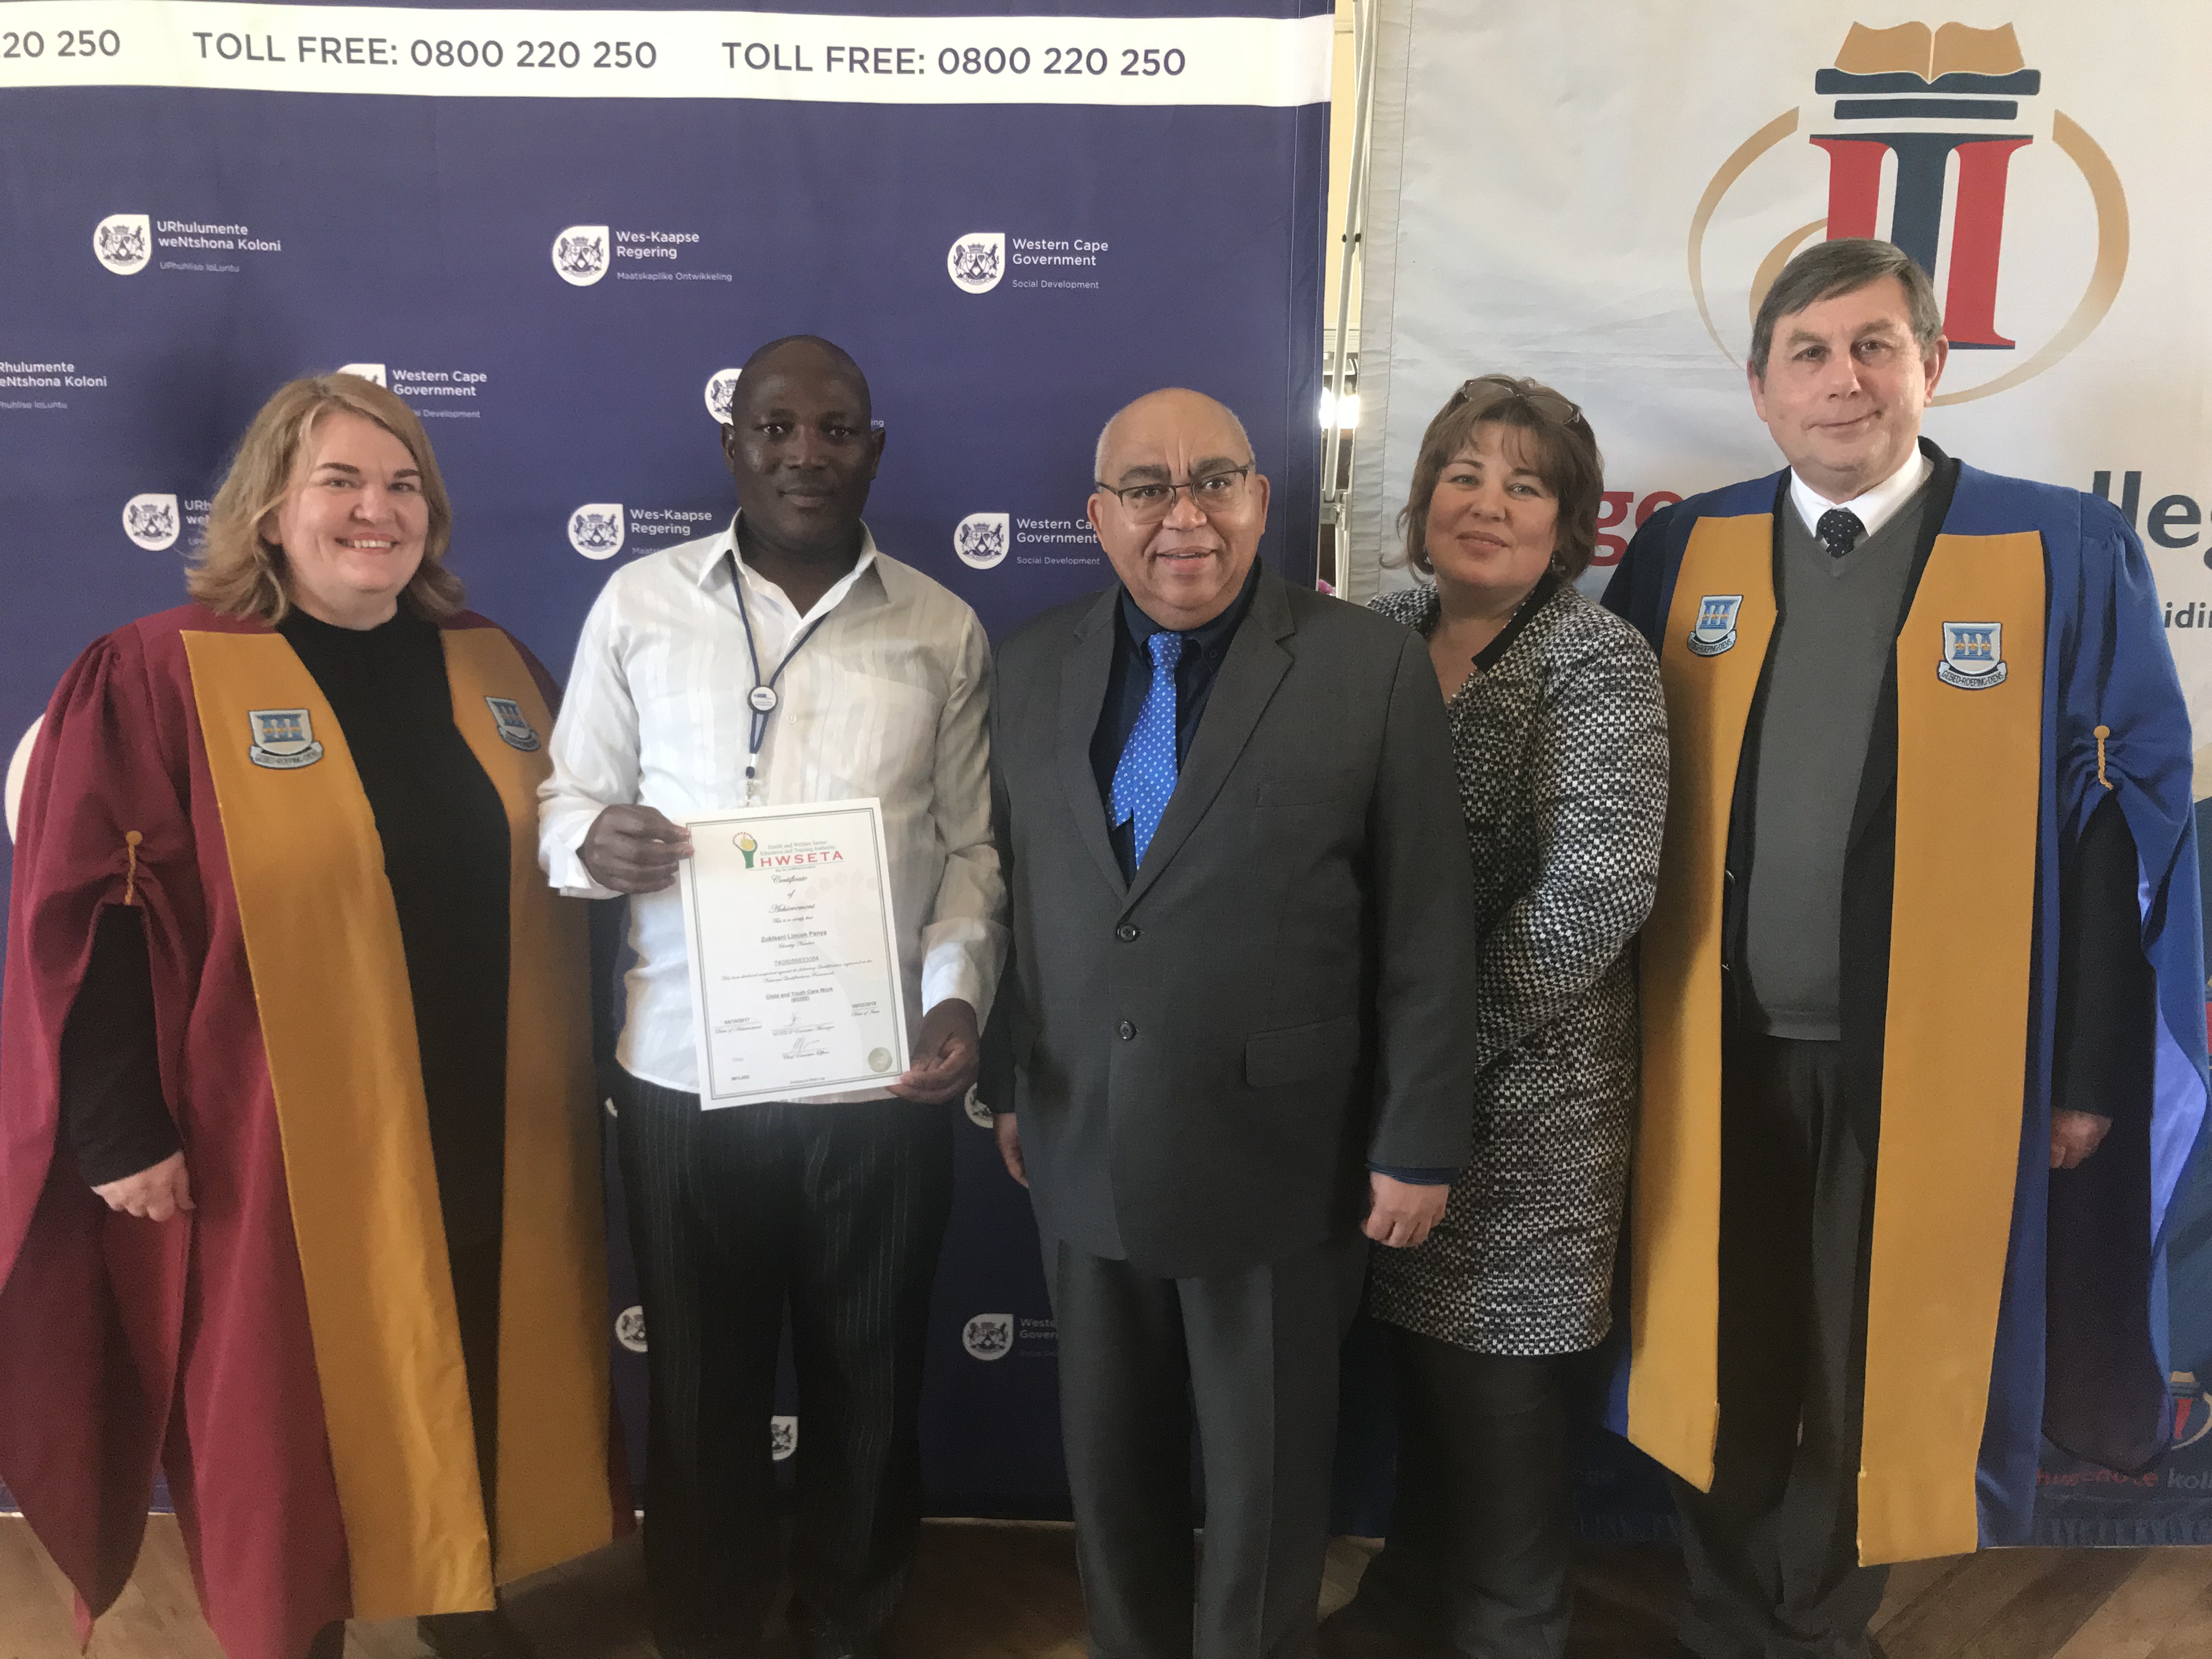 Nadia von Vielligh (Hugenote Kollege), Mr. Zukisani Panya (graduate who was a groundskeeper and now is a CYC worker), Minister Fritz, Leana Goosen (DSD Head of Facilities), Rev. Willie vd. Merwe (Rector of Hugenote Kollege)